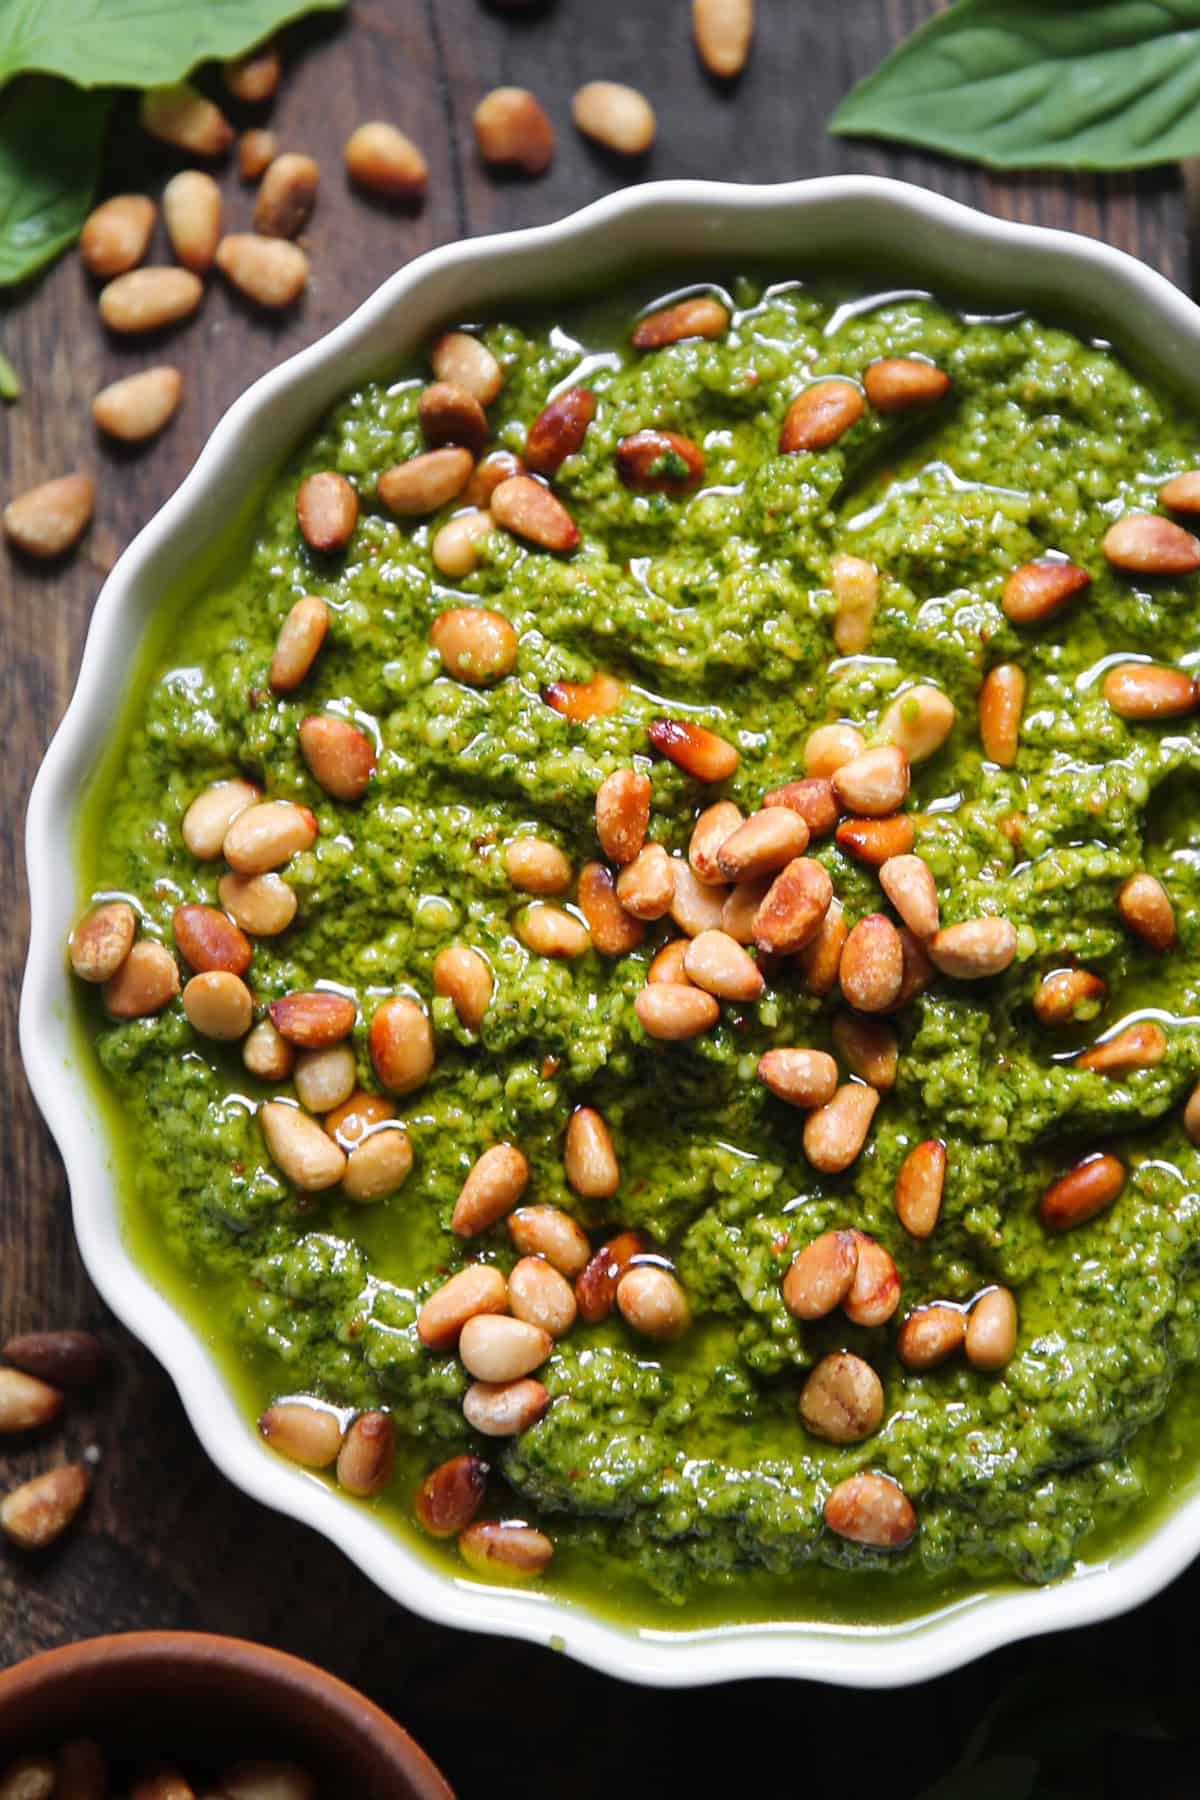 homemade basil pesto with pine nuts on top